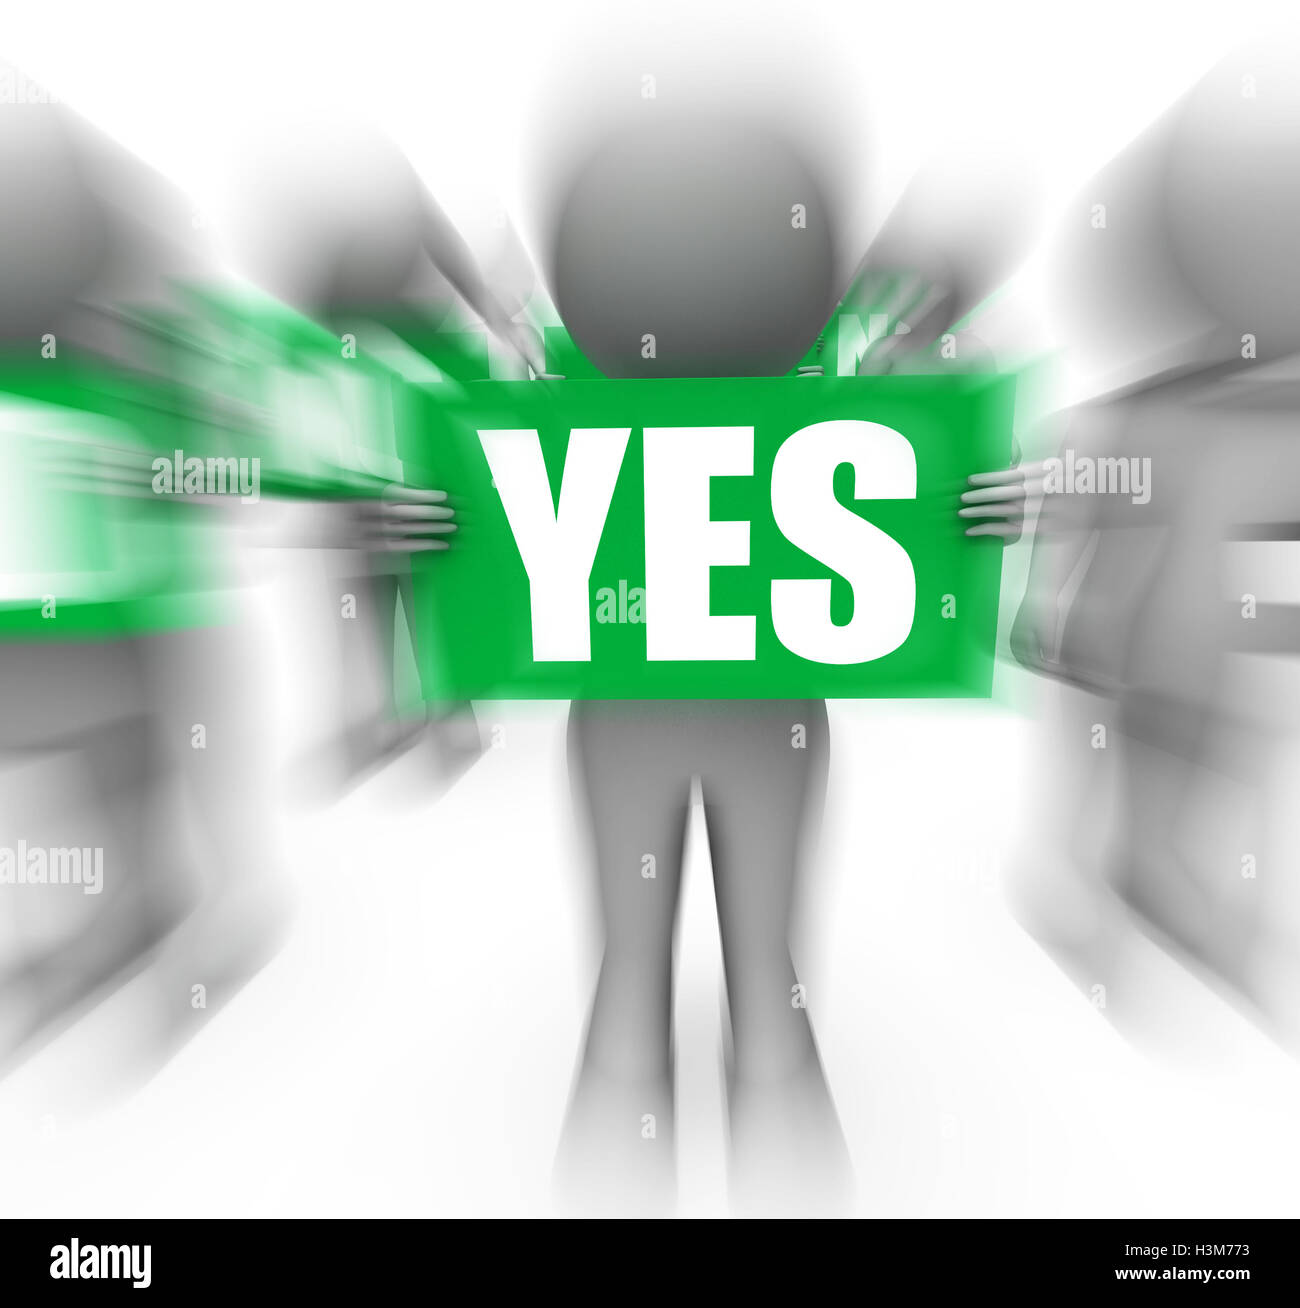 Characters Holding No Yes Signs Displays Uncertain Or Confused Stock Photo